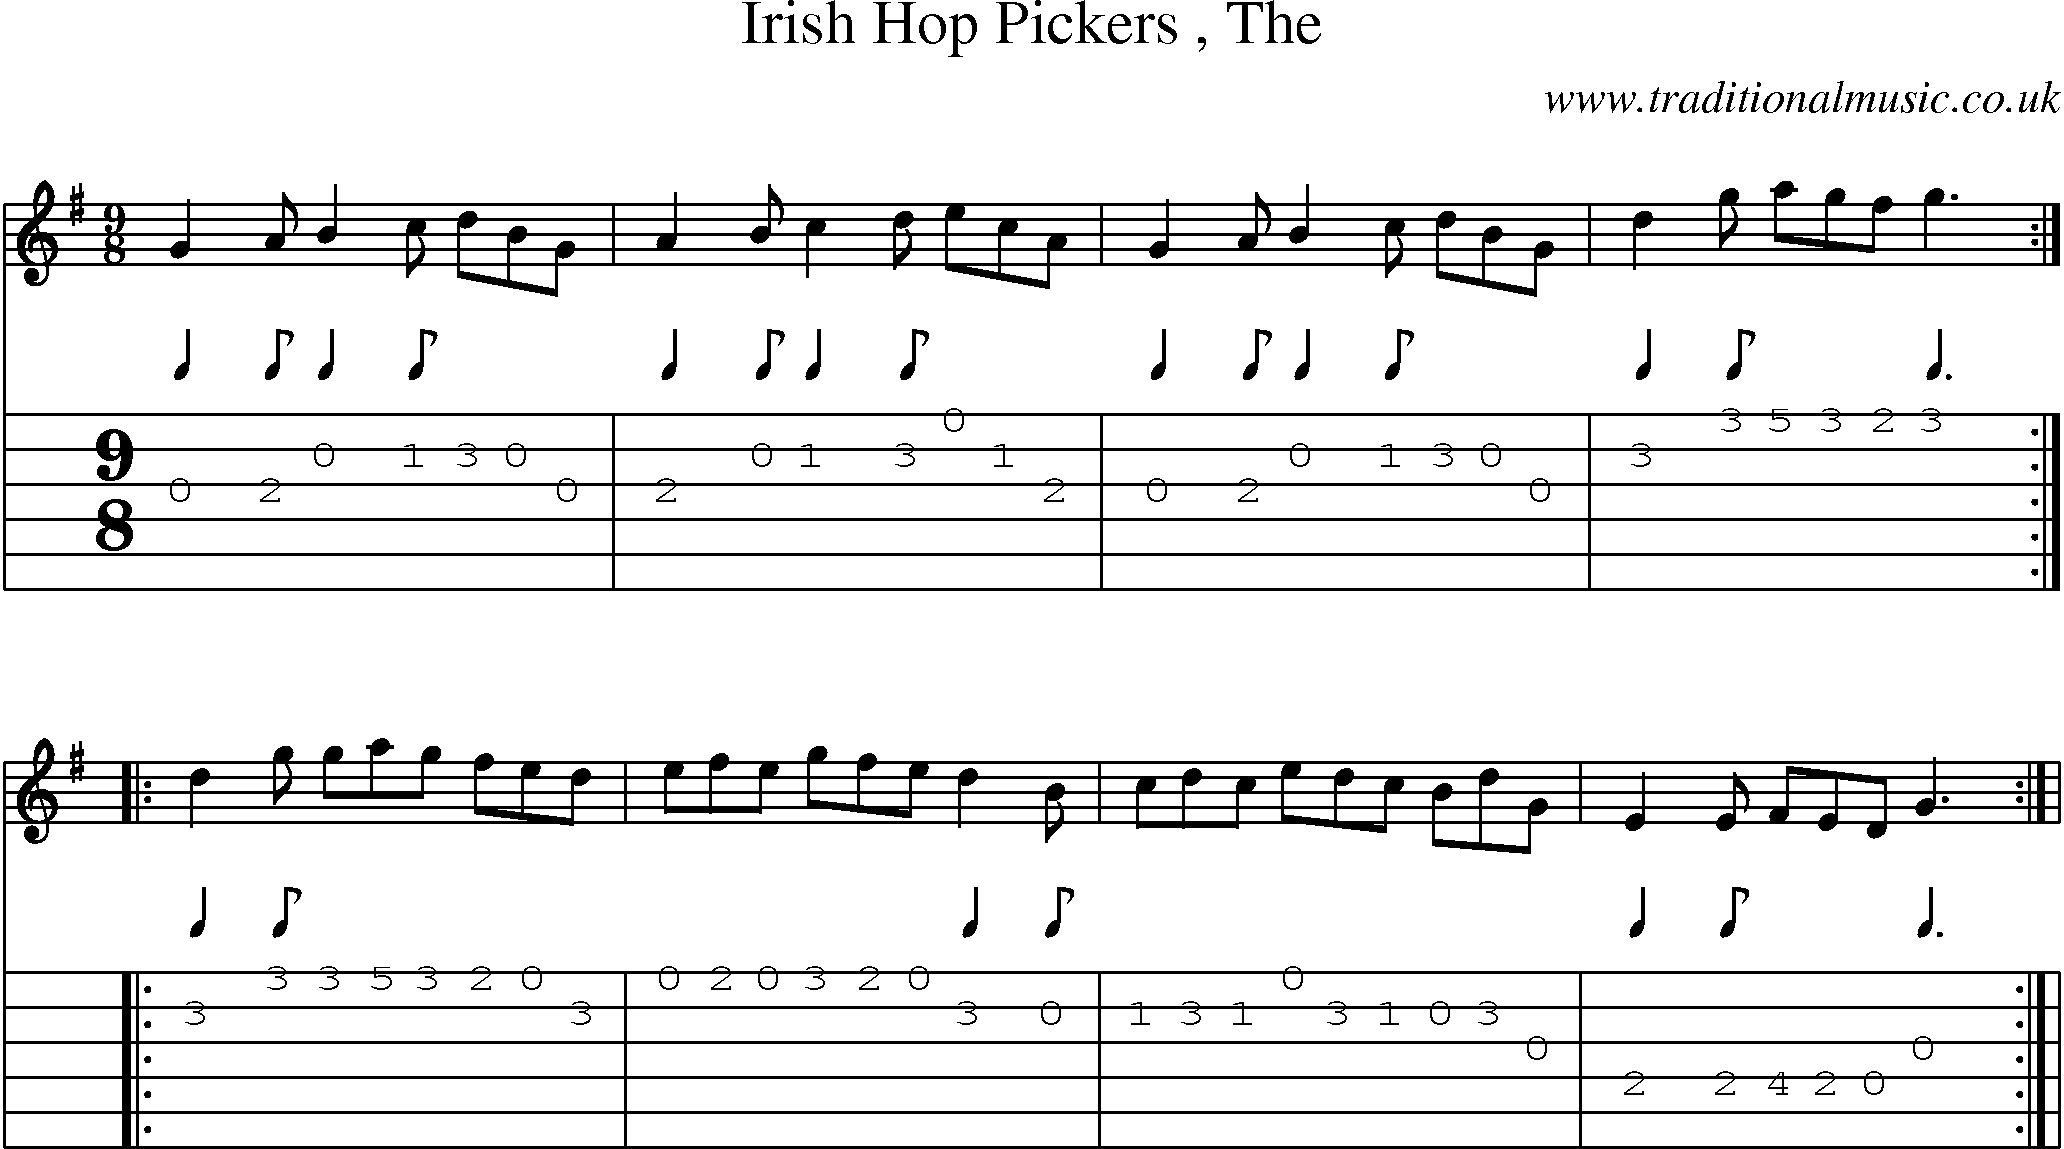 Music Score and Guitar Tabs for Irish Hop Pickers